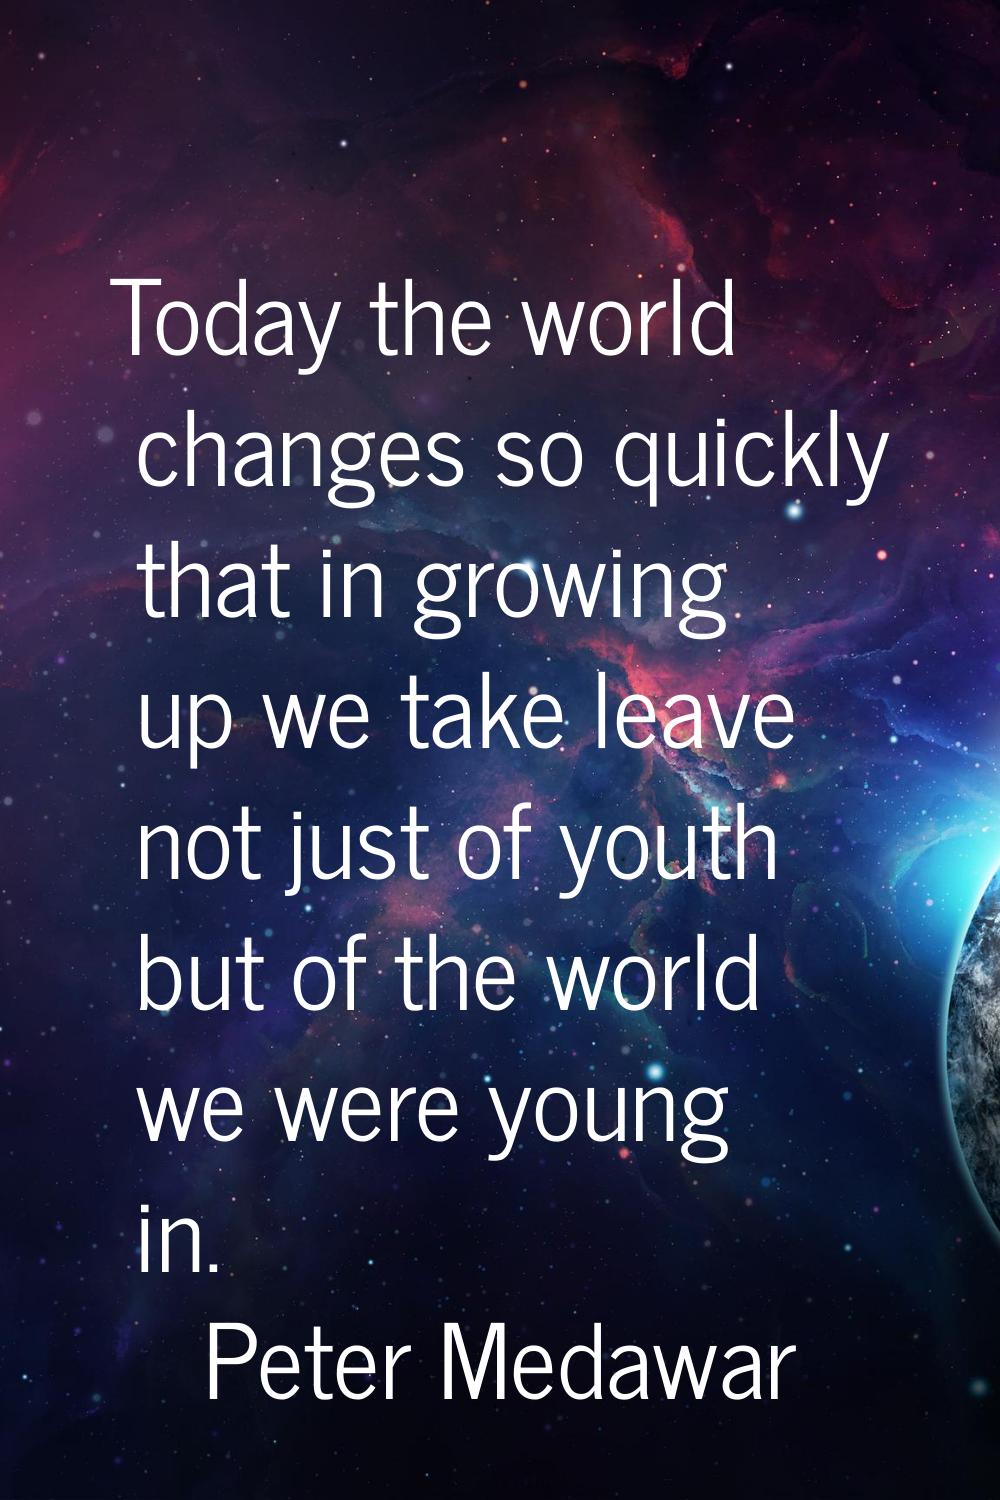 Today the world changes so quickly that in growing up we take leave not just of youth but of the wo